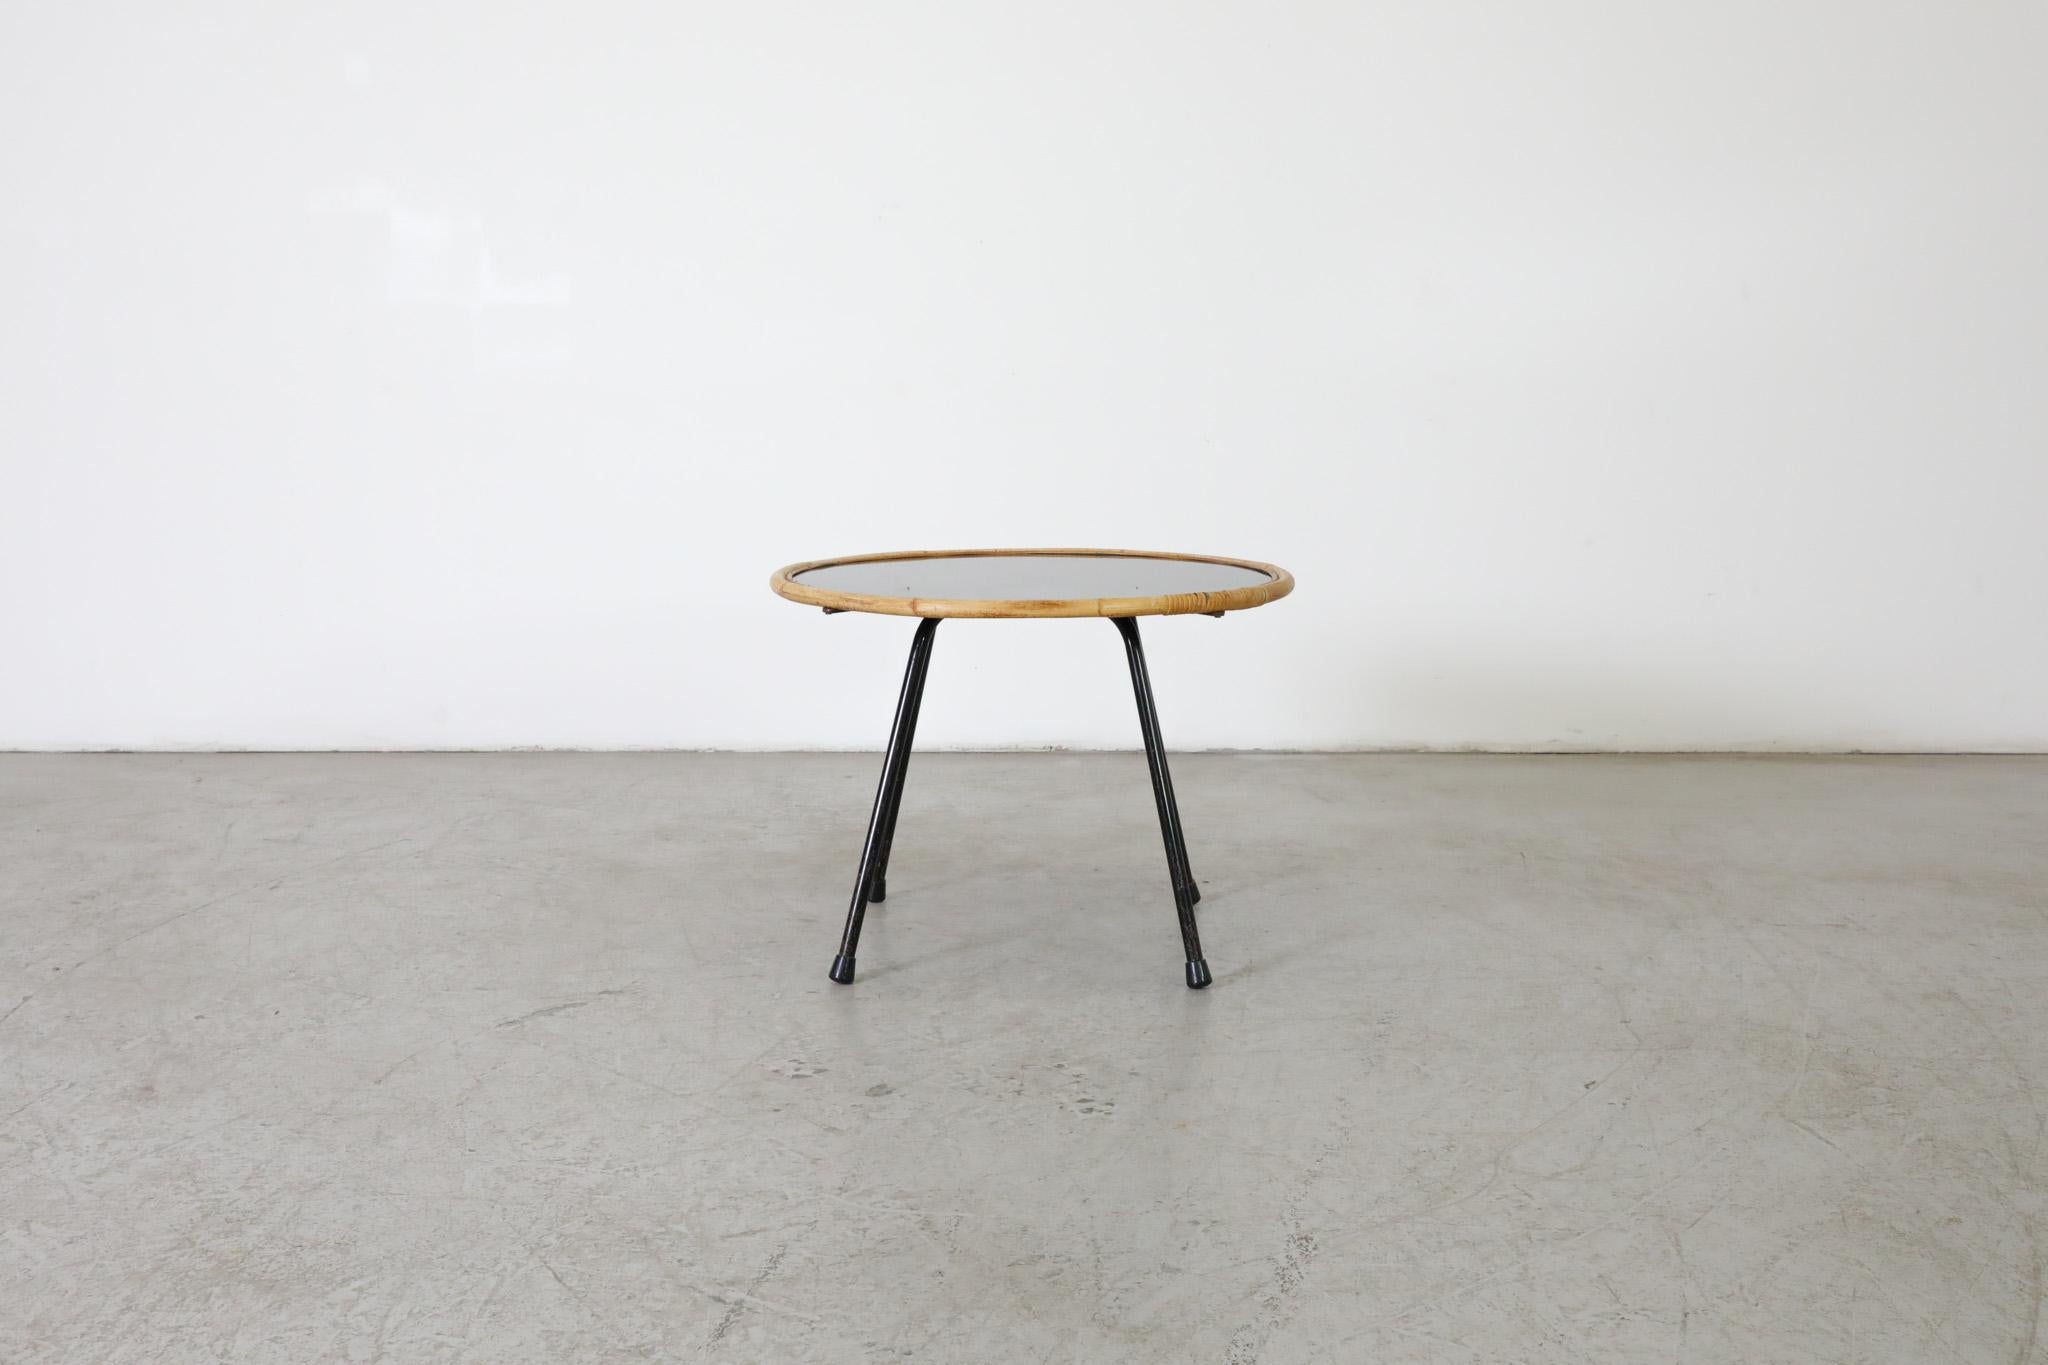 Attractive Mid-Century side table with a unique combination of a black glass top, black enameled metal frame and hand-woven bamboo rim. Stylish and sleek light weight side table Attributed to Dutch Mid-Century designer Dirk van Sliedregt, 1960s. A